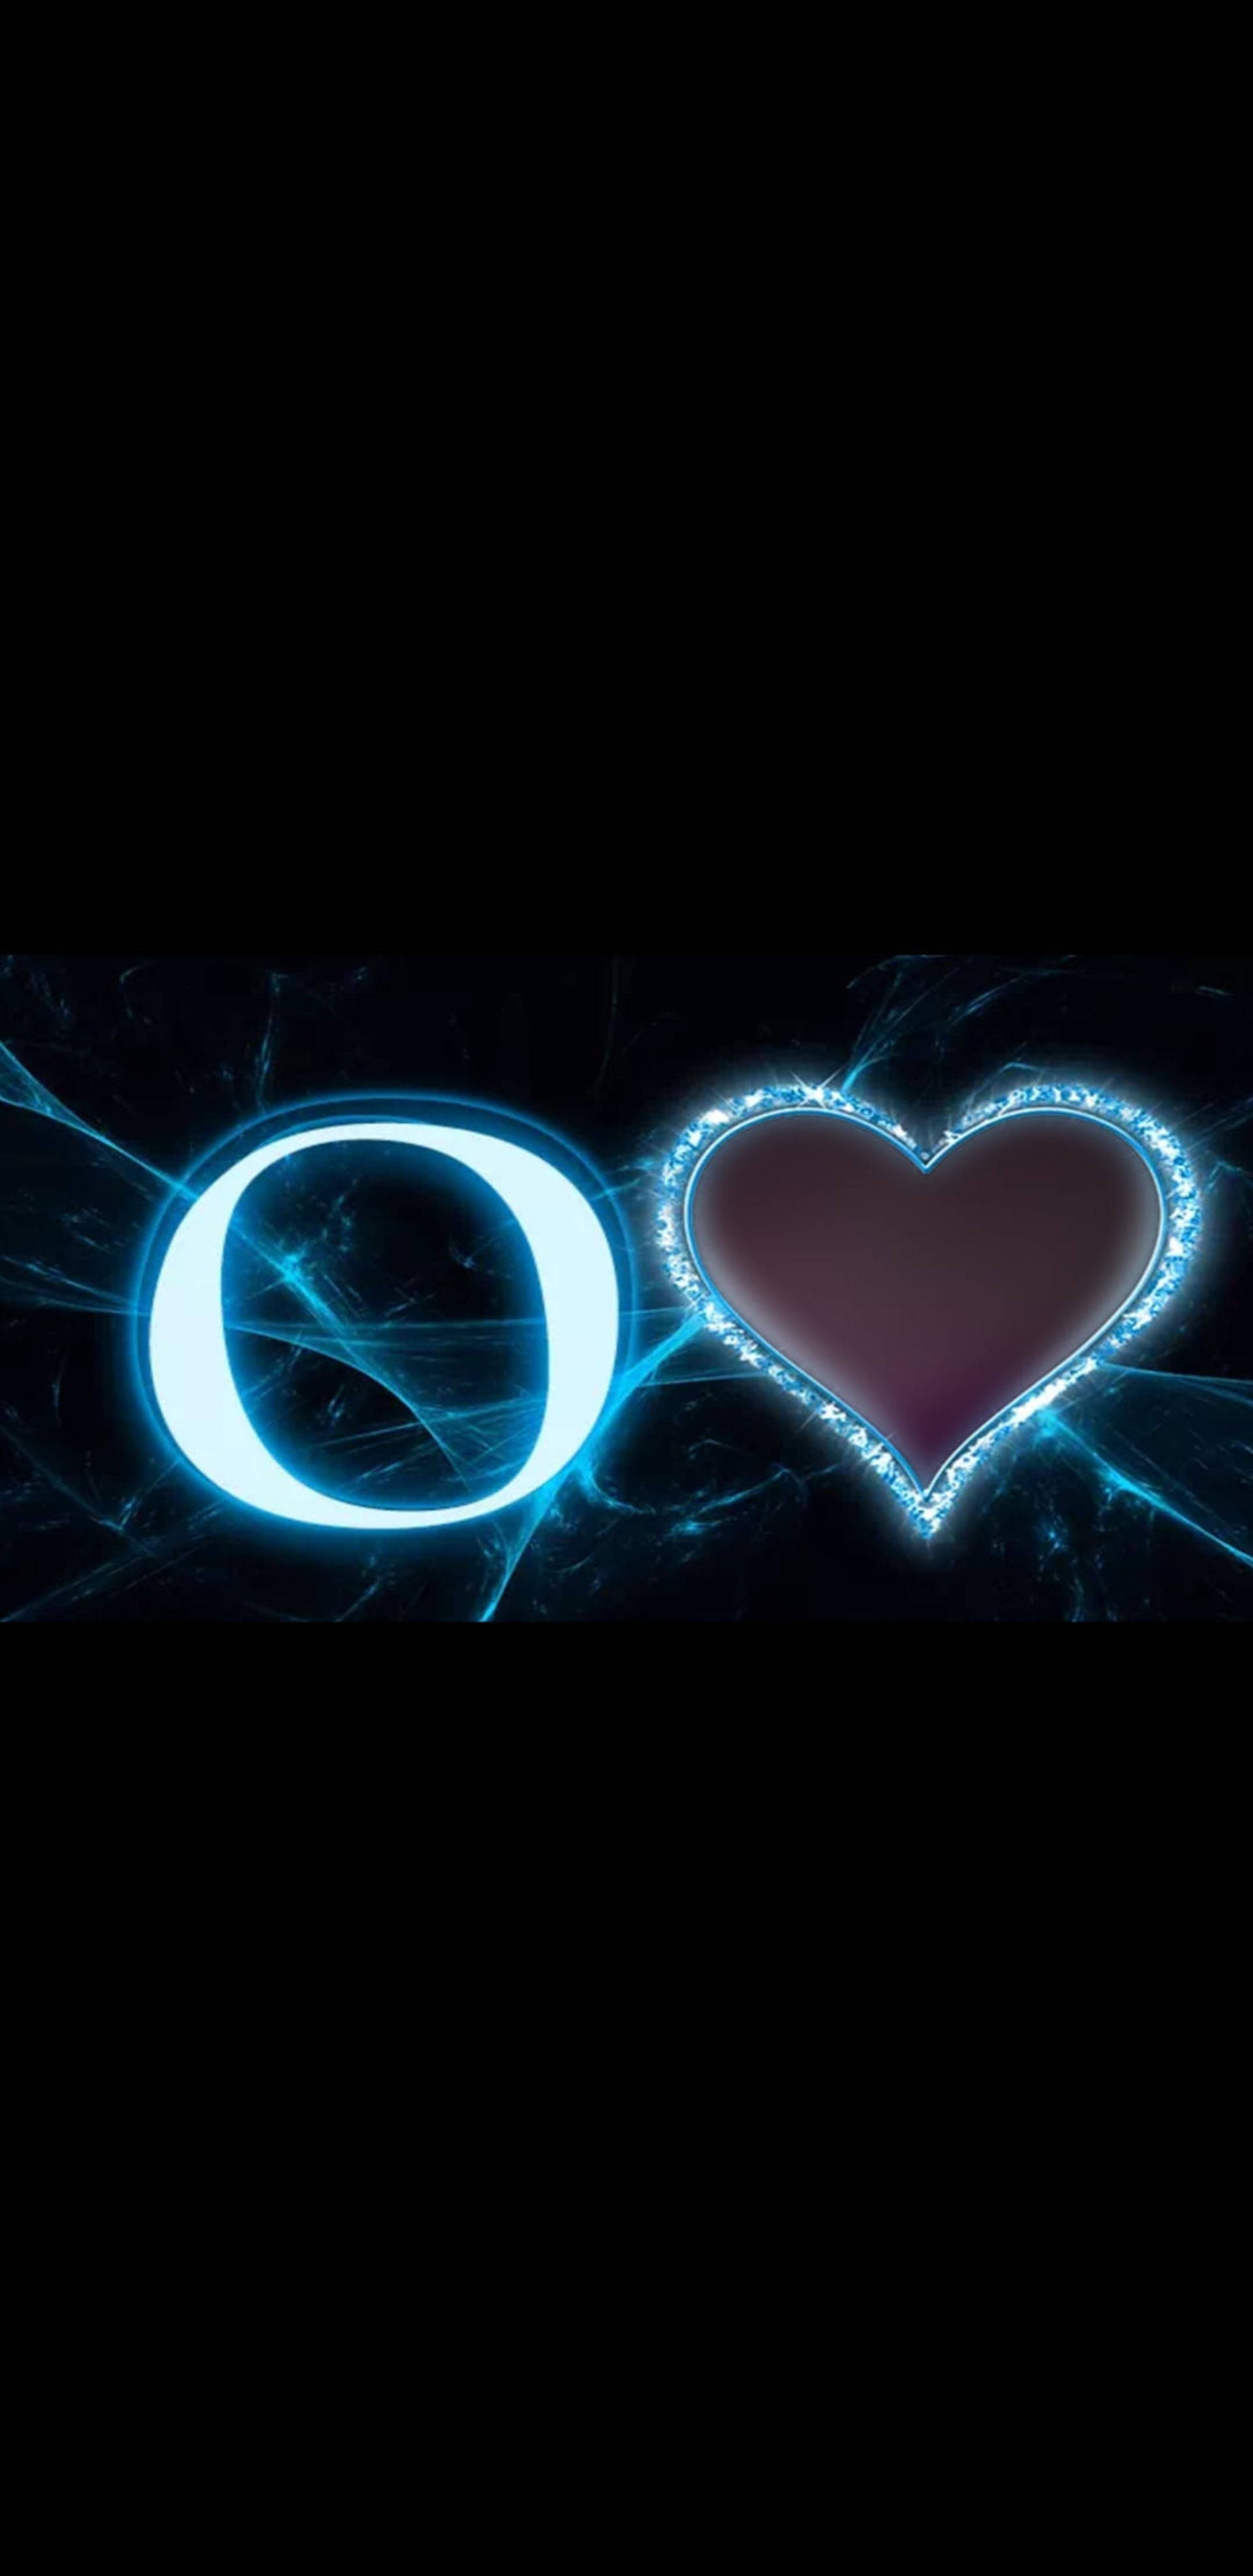 Download Letter O And Black Heart Wallpaper 